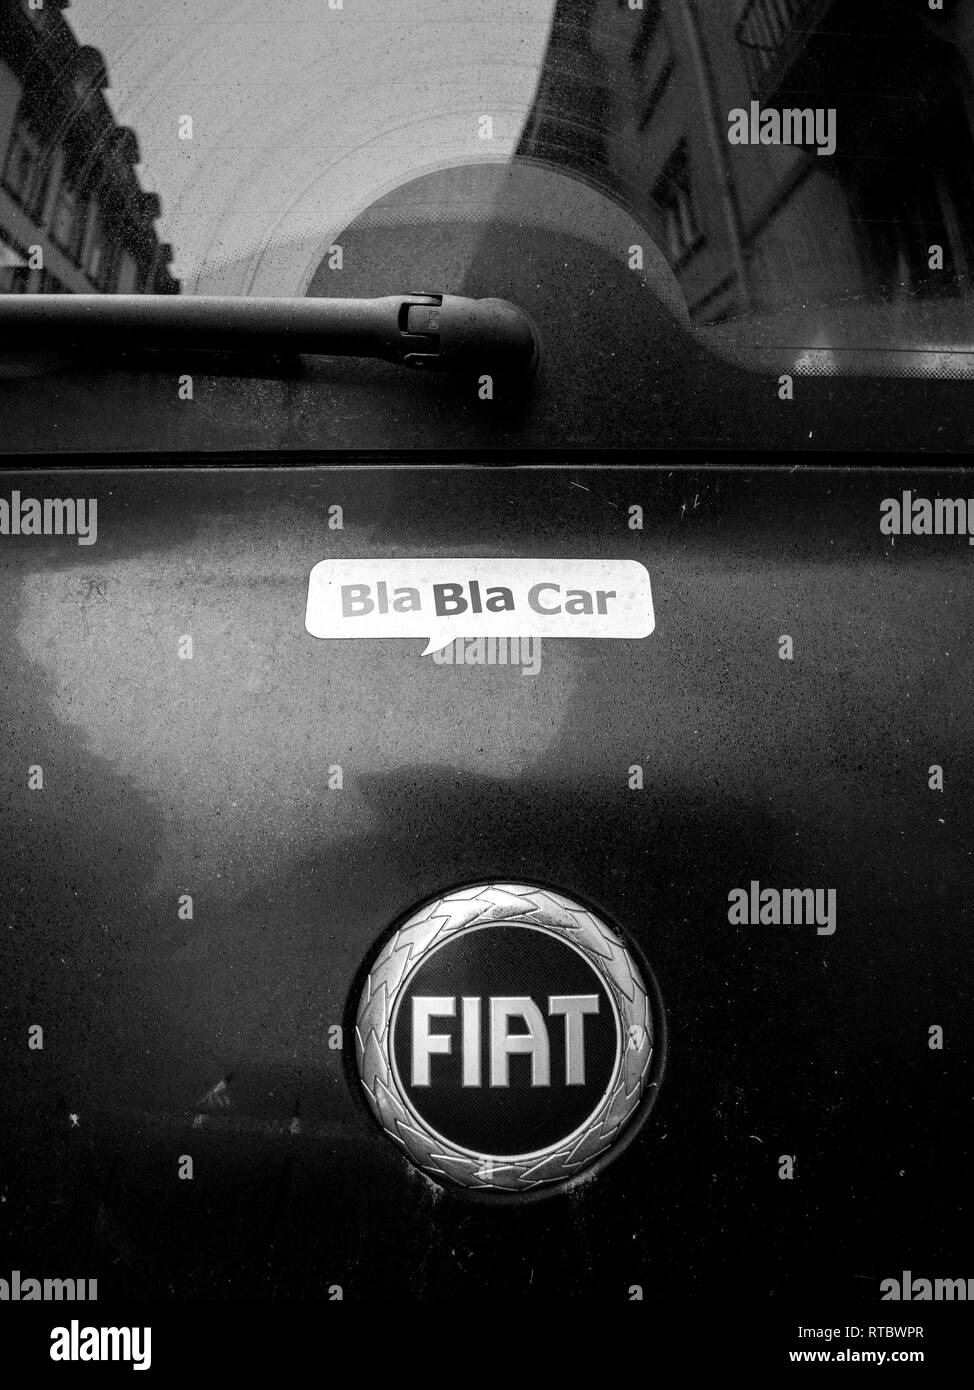 PARIS, FRANCE - DEC 4, 2017: BlaBlaCar car sharing carshare ridesharing sticker on the back of a Fiat car parked on a city street in Paris Stock Photo